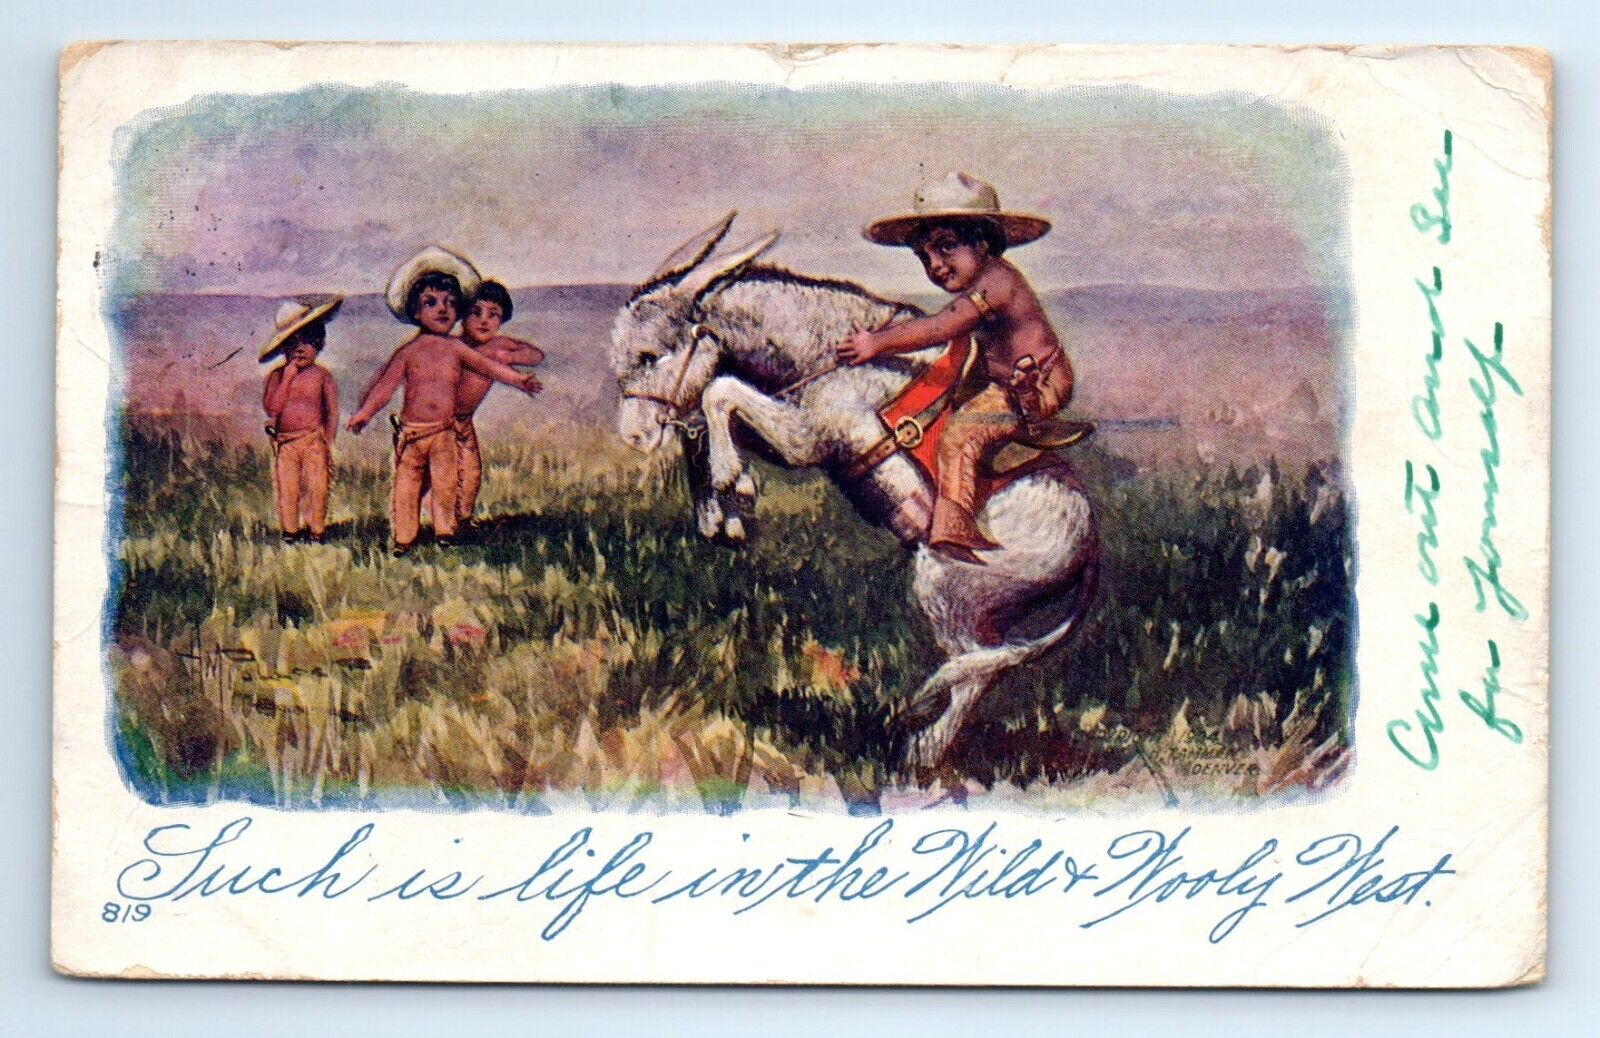 Native American Boy Burro Buster Life in the Wild Wooly West Postcard 1906